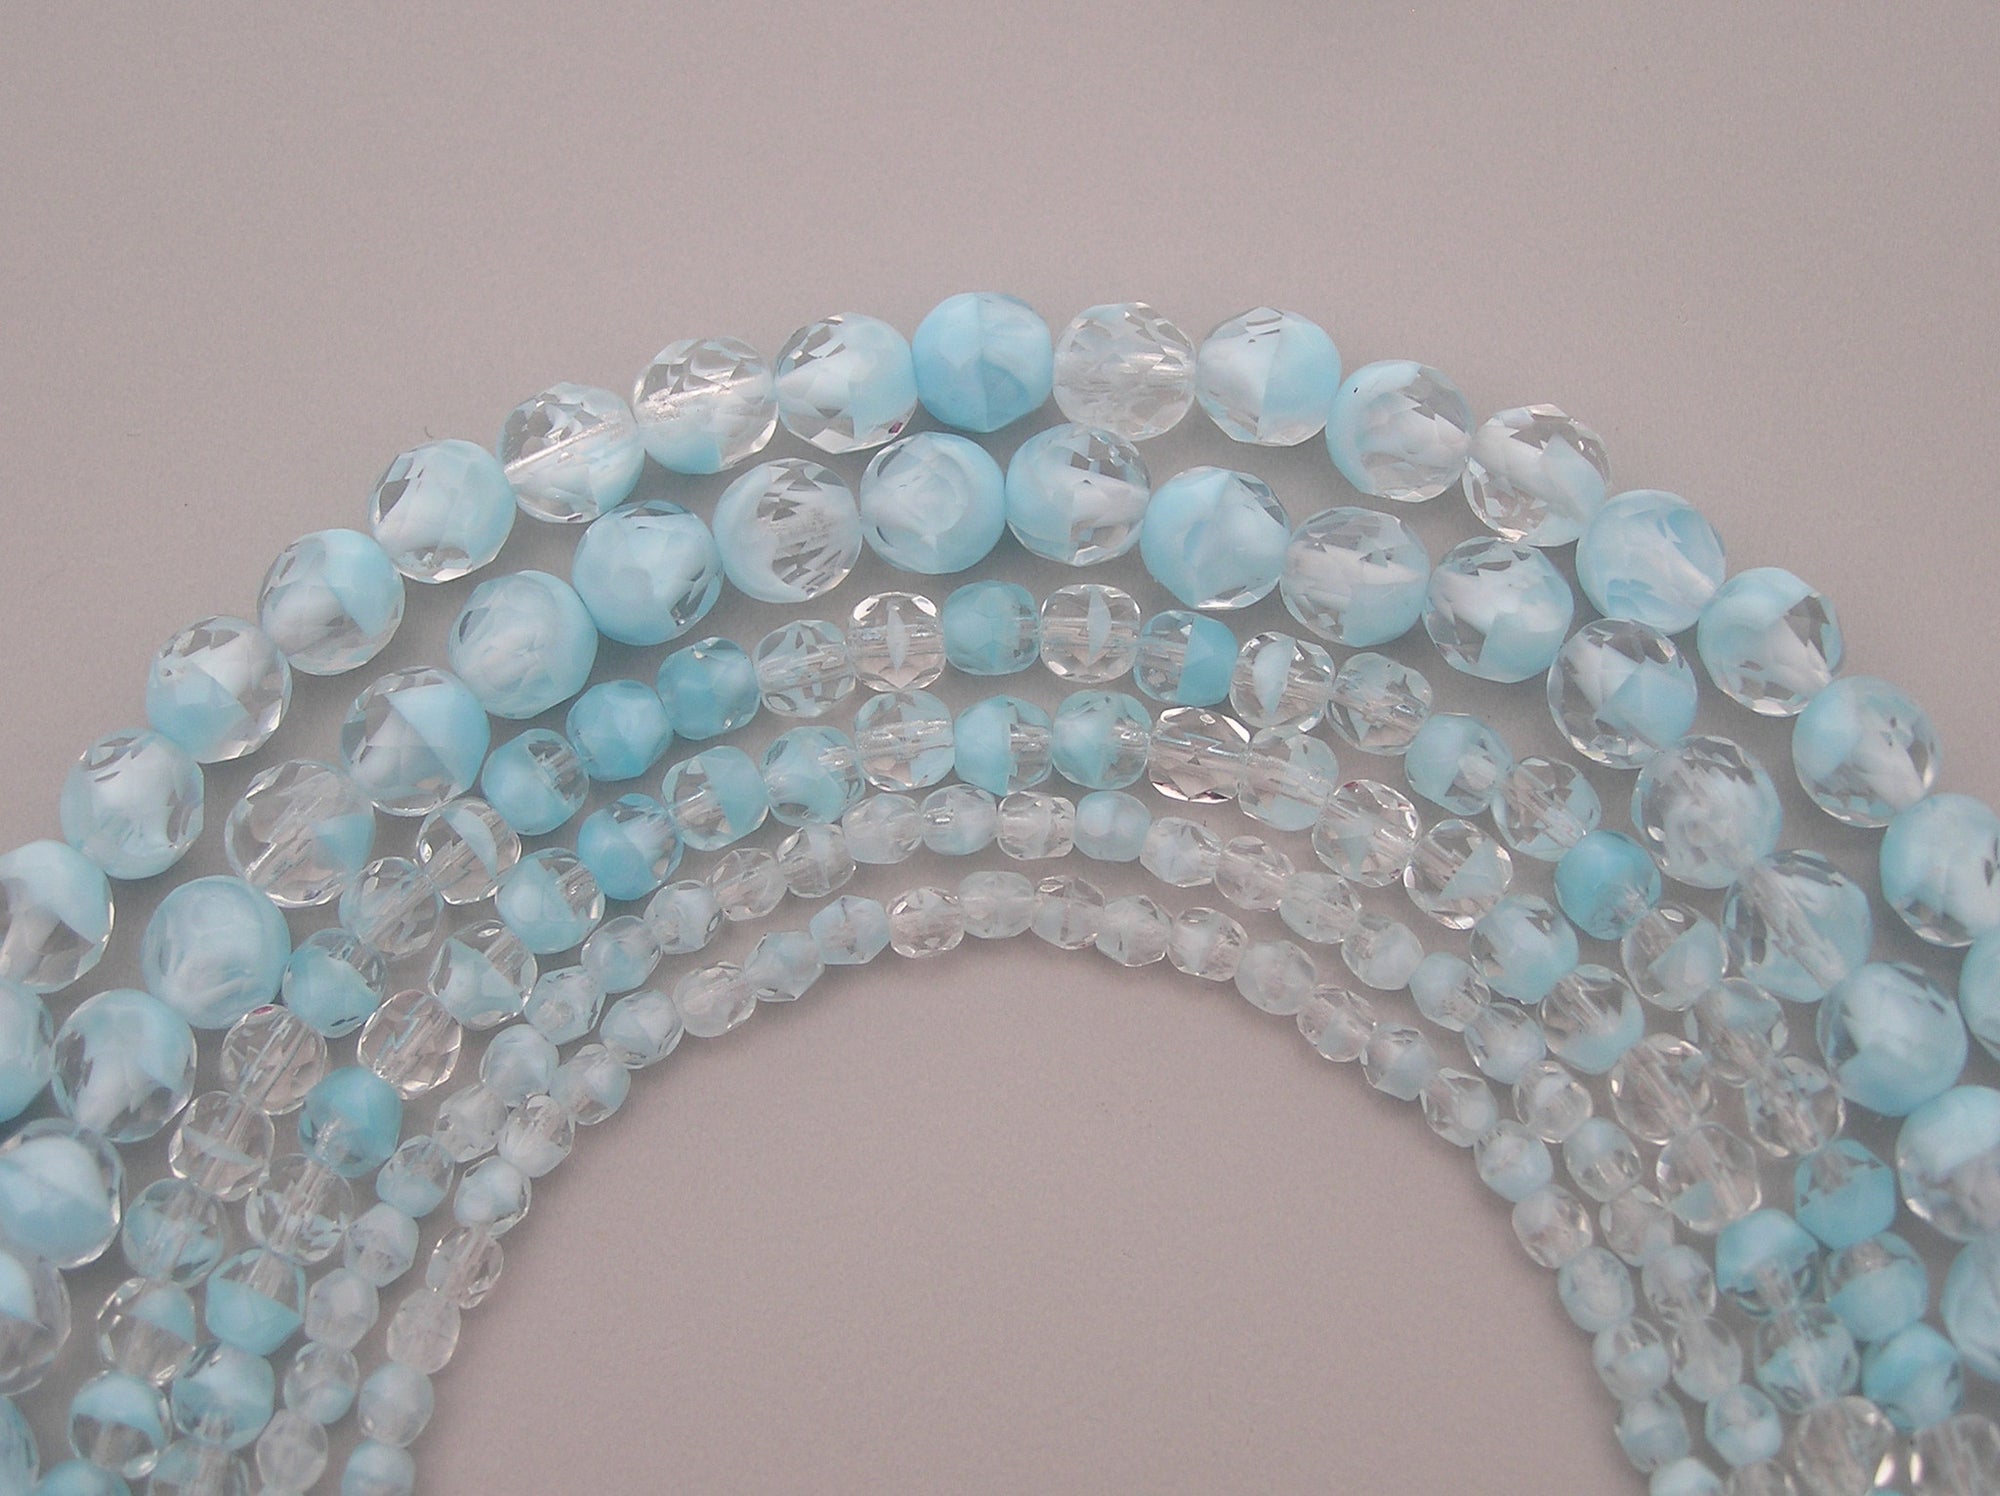 Crystal Light Blue Givre, 2-tone combination, Czech Fire Polished Round Faceted Glass Beads, 7 inch strands